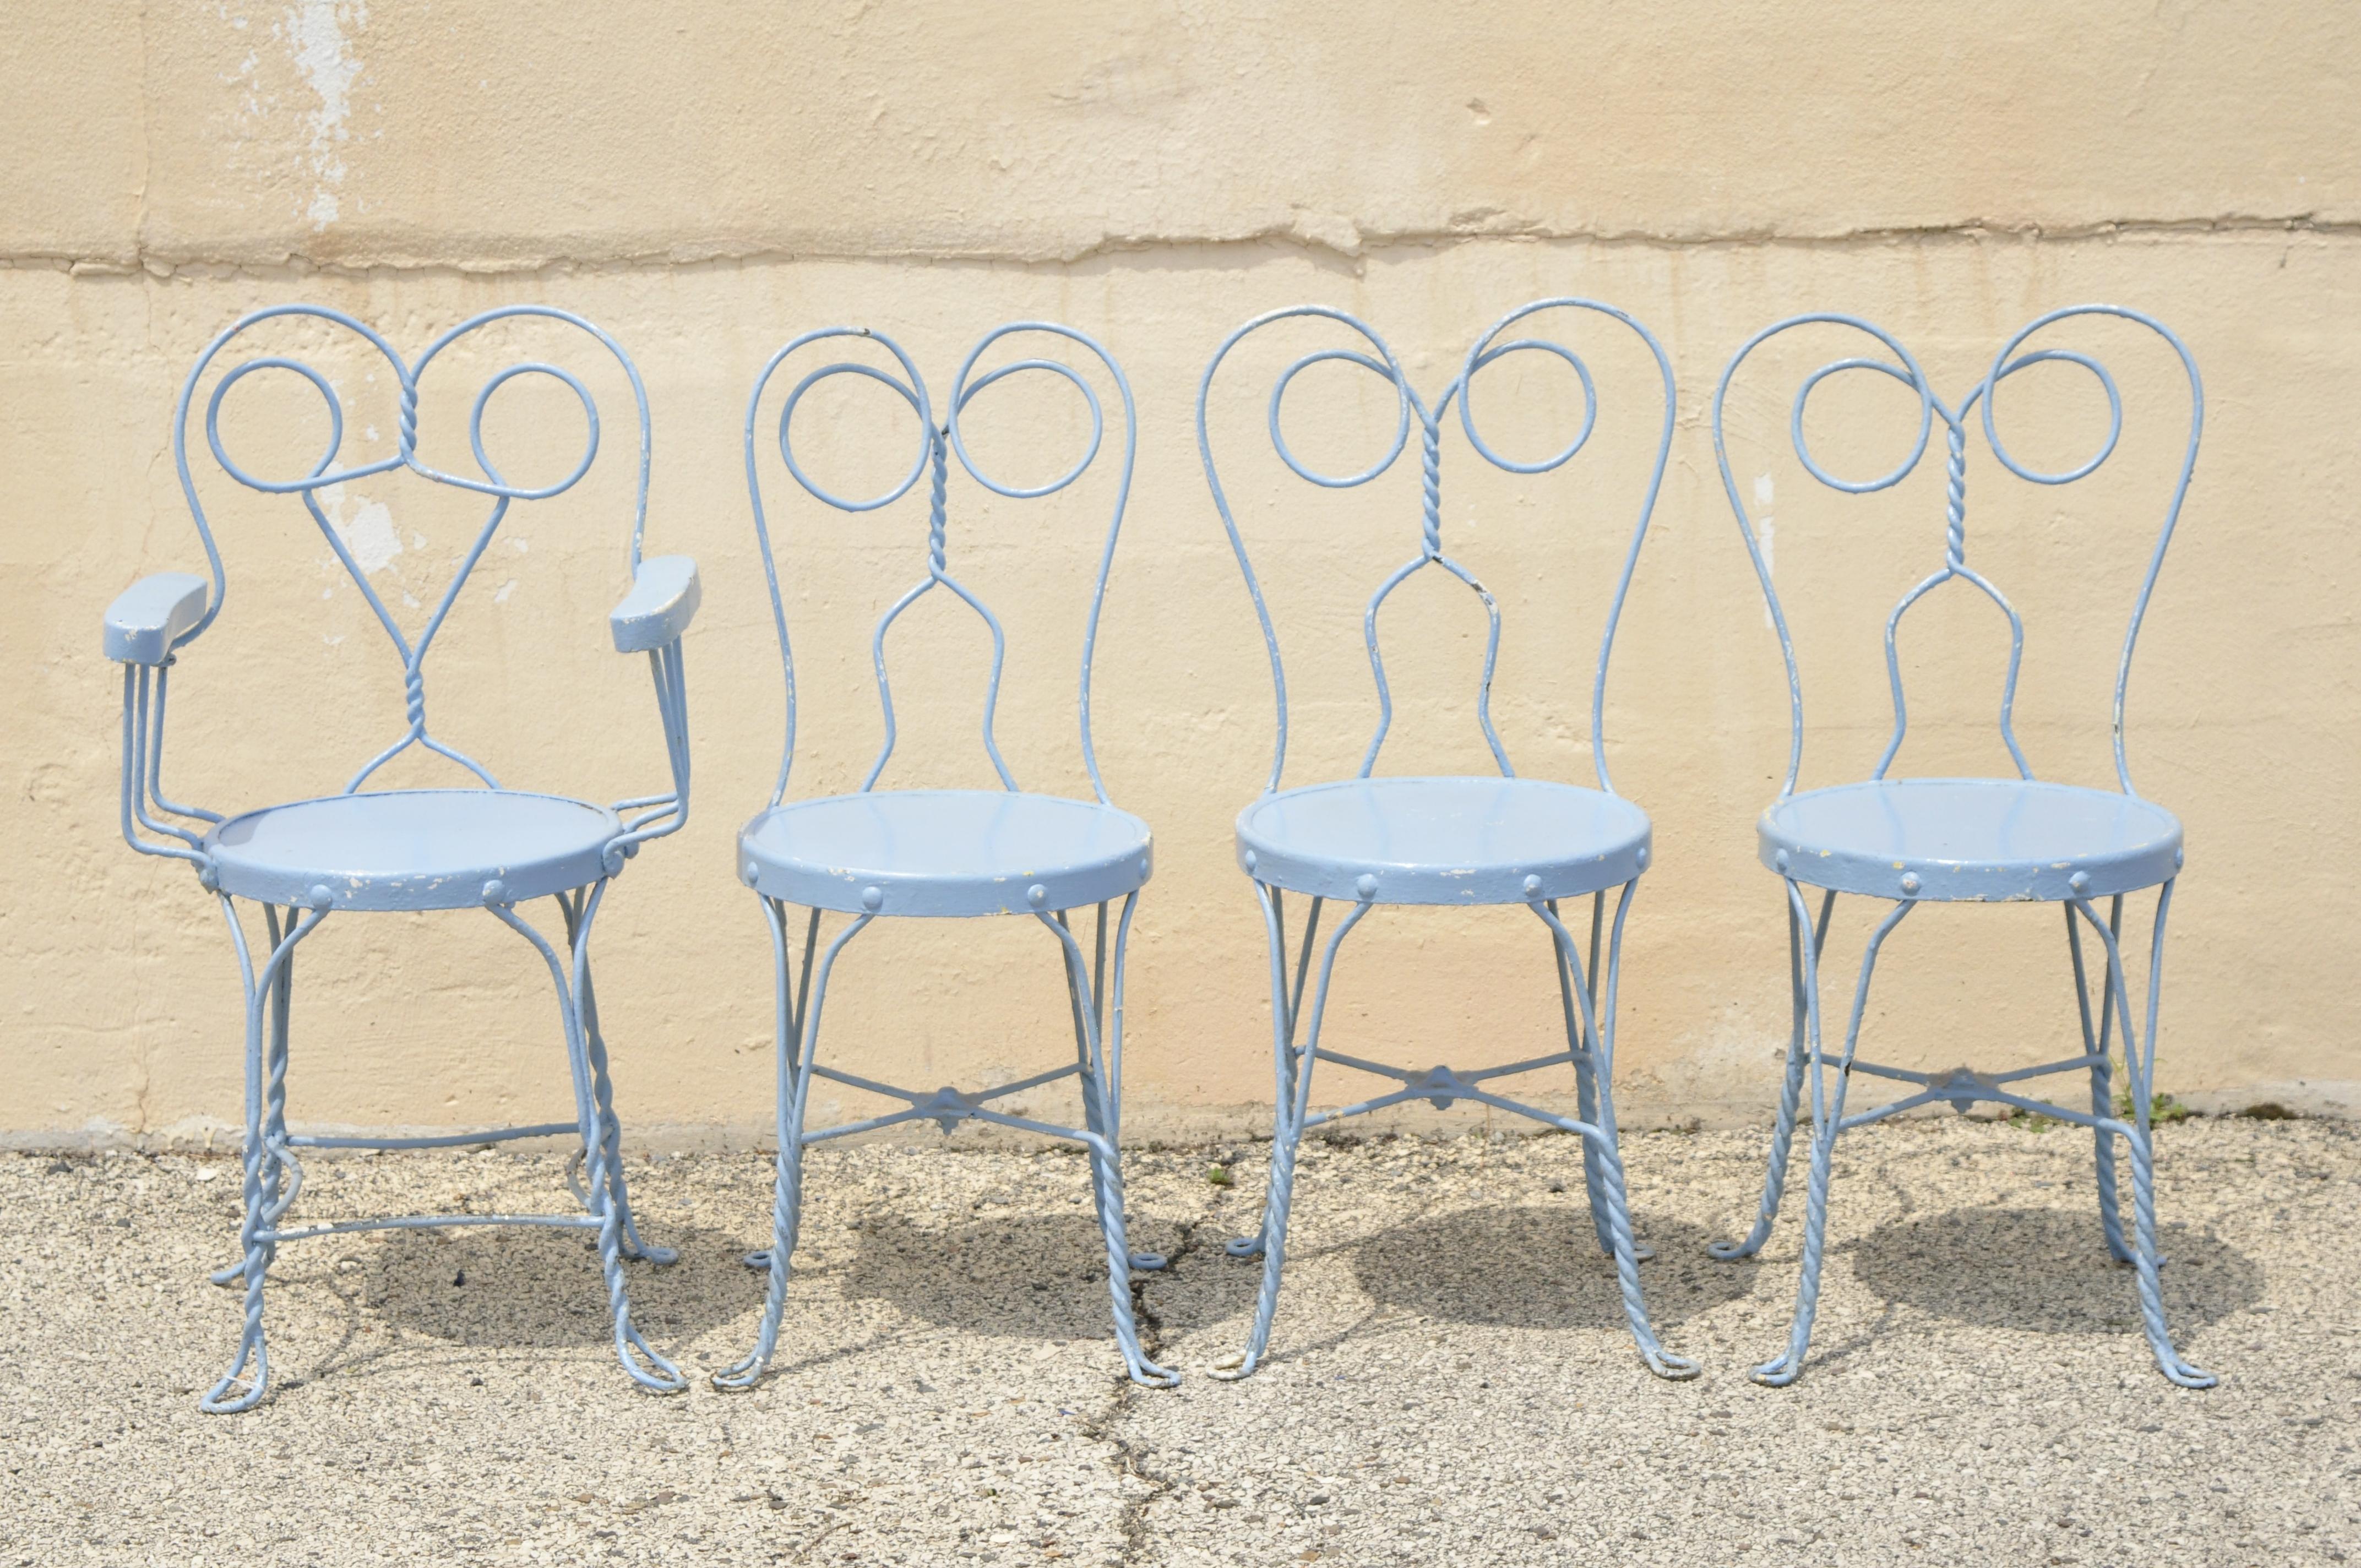 Antique wrought iron blue heart back ice cream parlor bistro dining set 4 chairs round table - 5pc set. Set includes (1) armchair, (3) side chairs, twisted wrought iron bases, round wooden table top, blue painted finish, very nice antique set, great